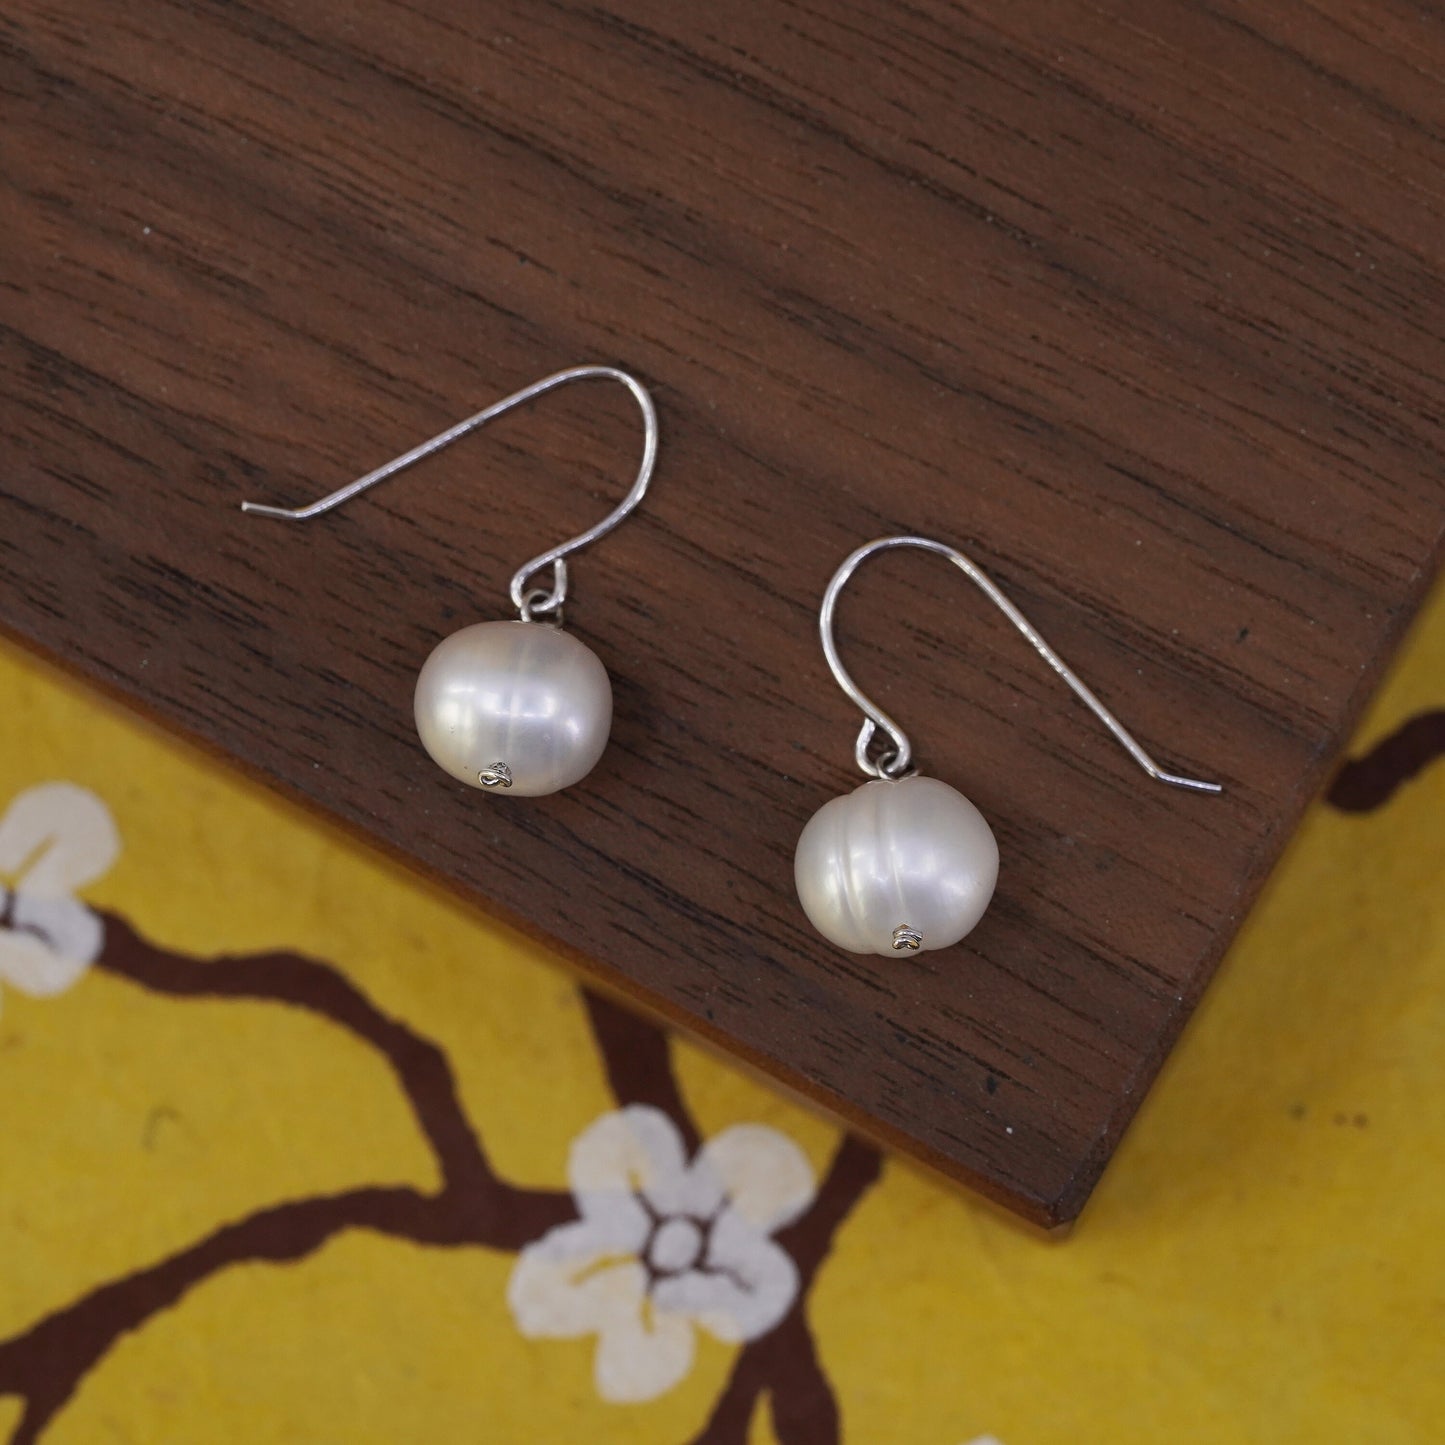 vintage Sterling silver handmade earrings, 925 studs with white pearl drops